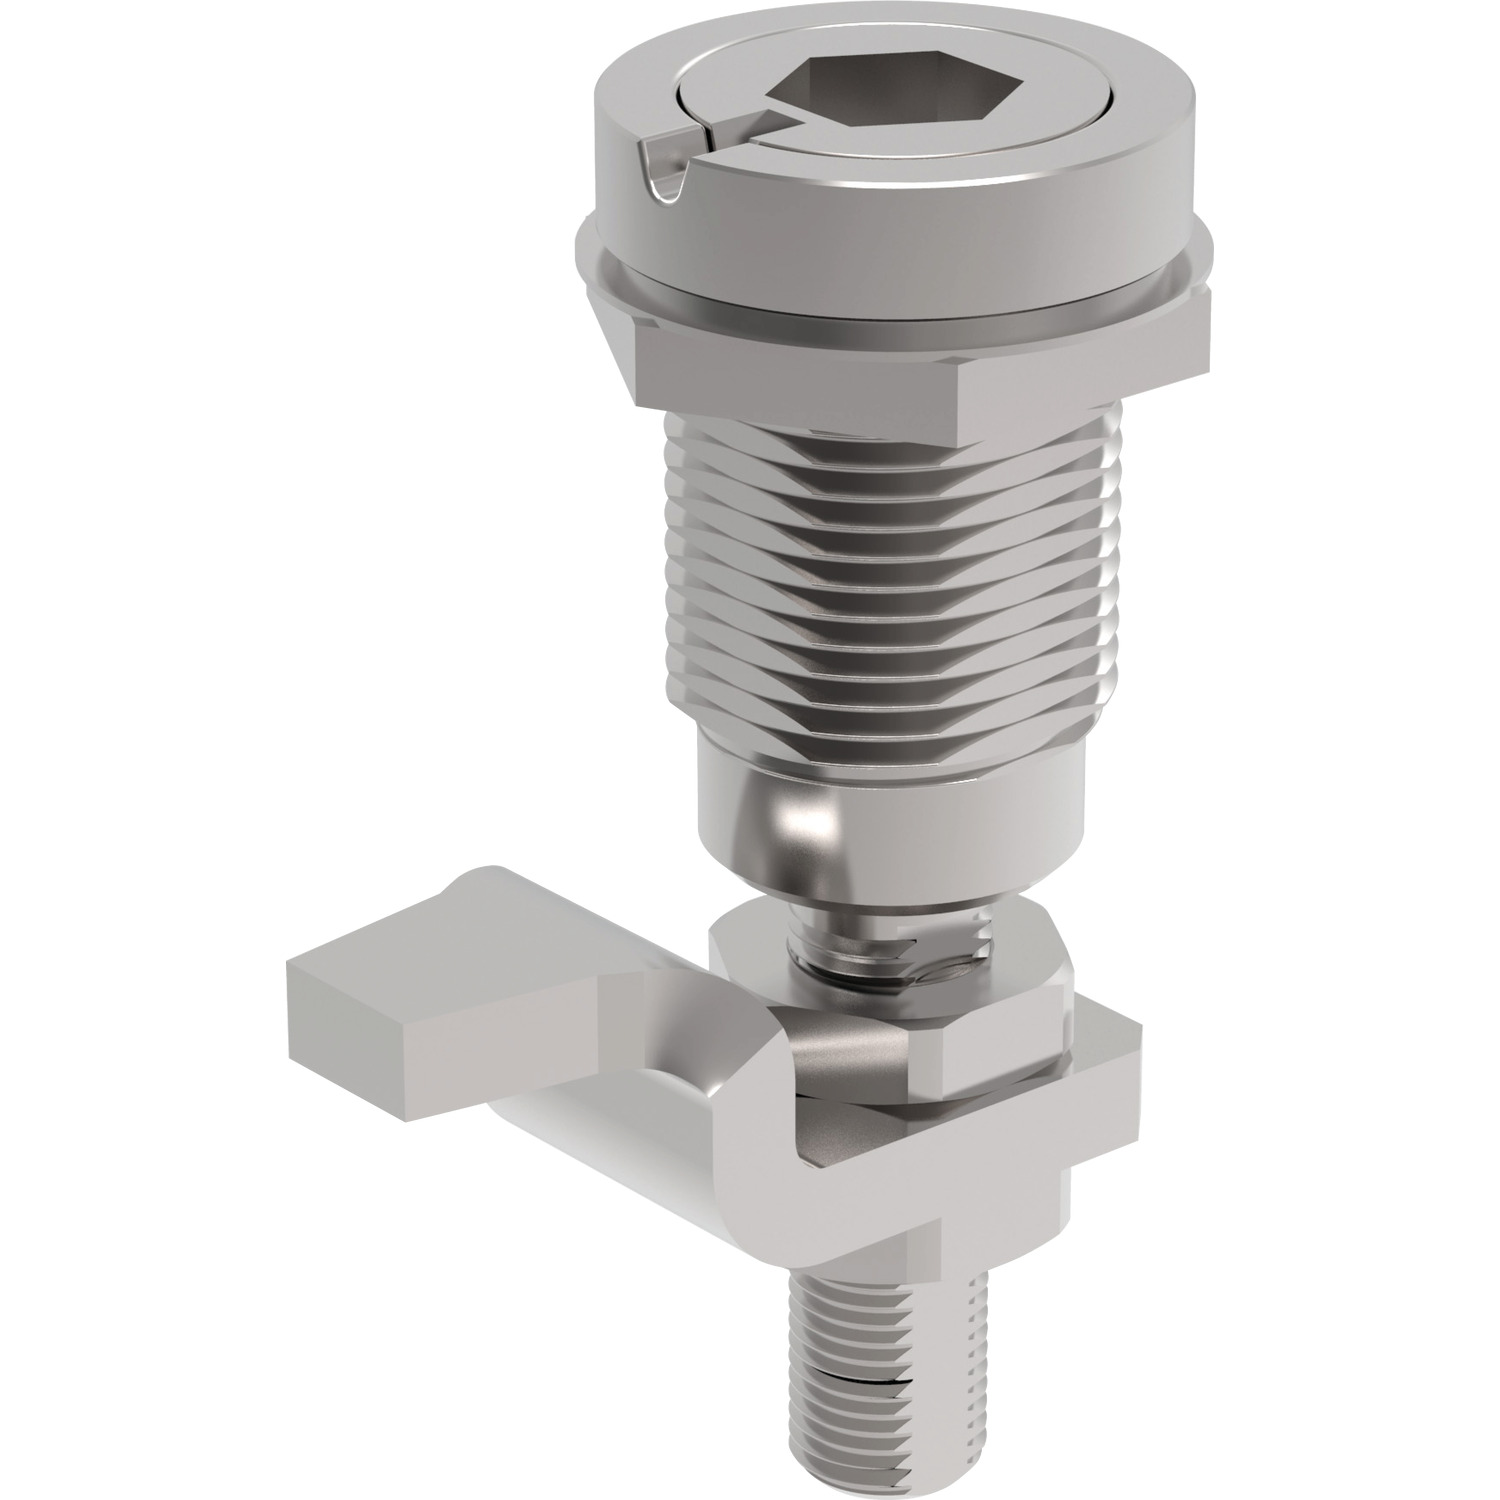 A1611.AW0080 Comp. Latch Flexi-Sys - Slotted (2 x 4) insert driver - adj. grip - ZDC, Chrome plated